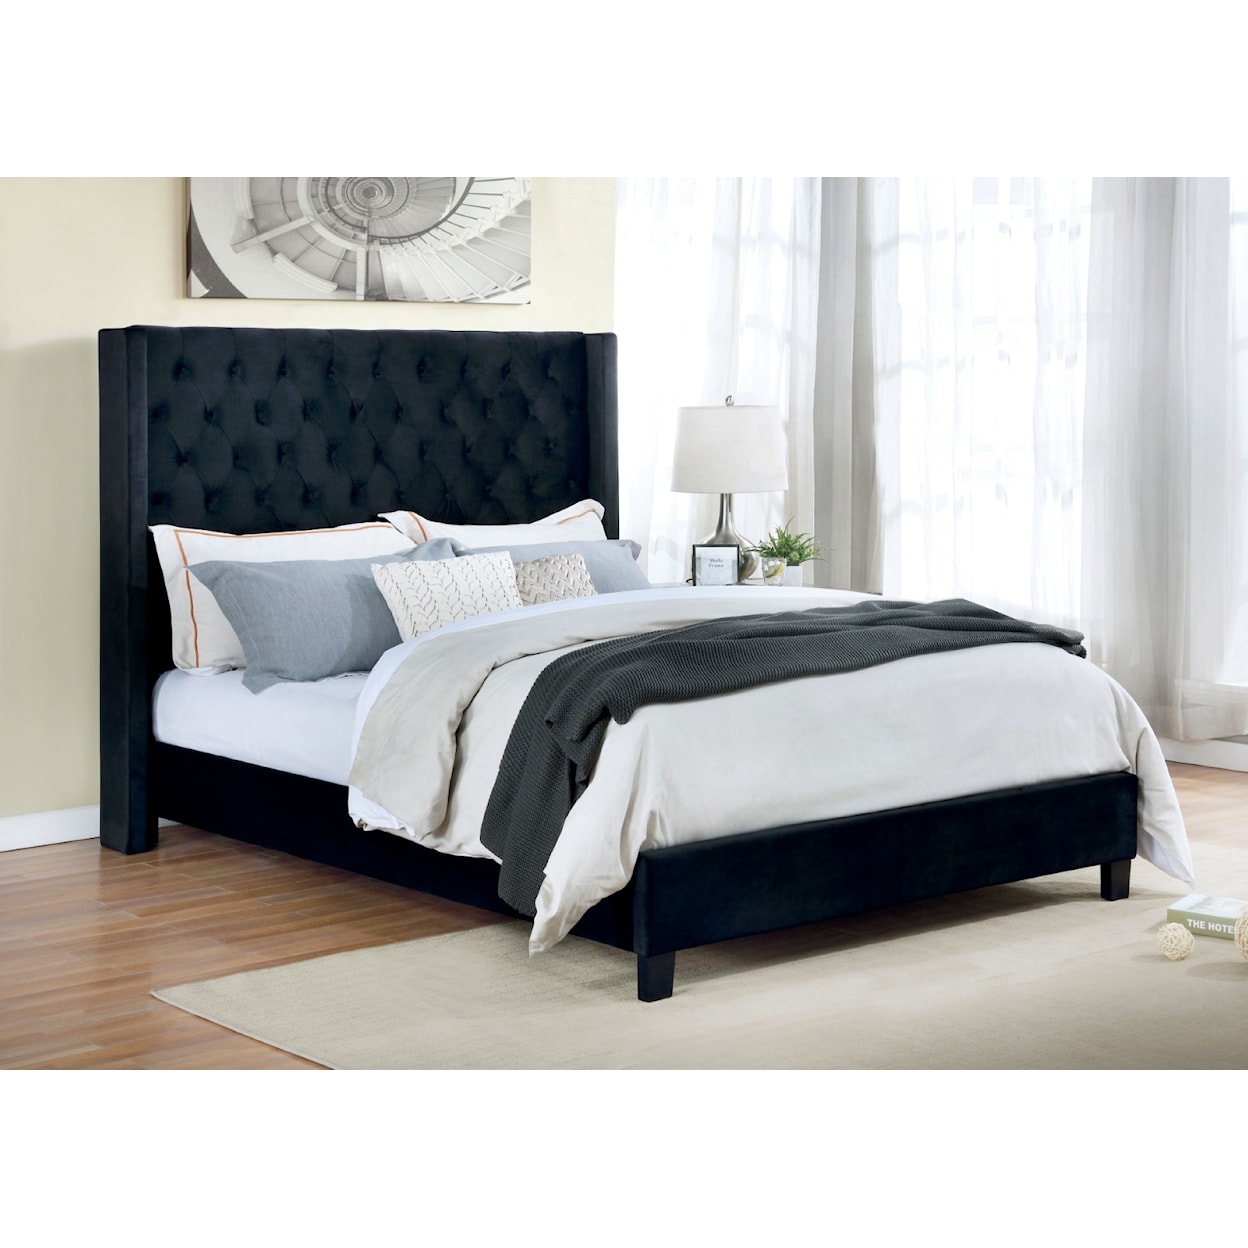 Furniture of America Ryleigh Cal. King Bed